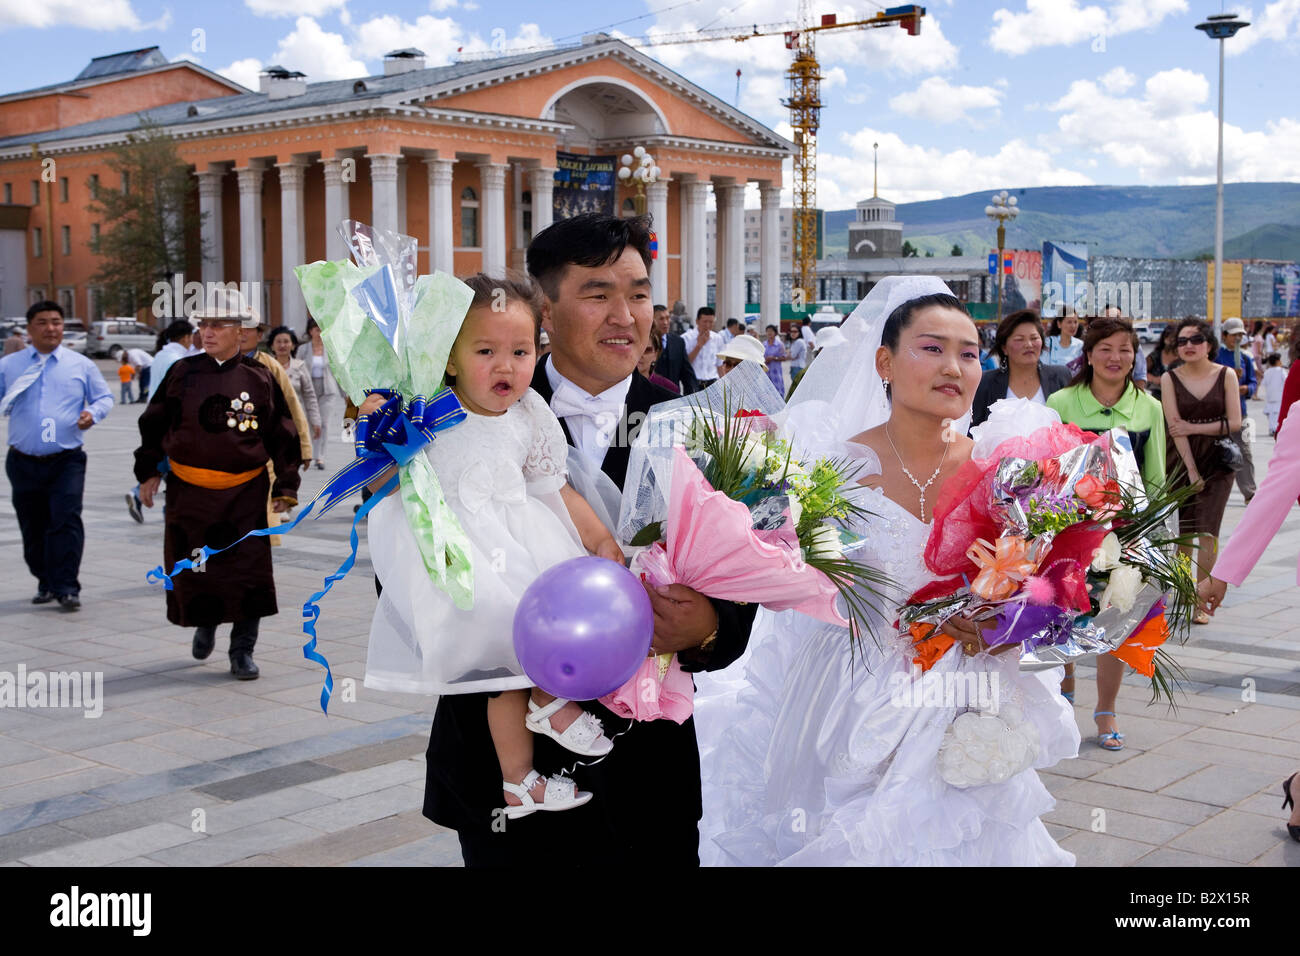 https://c8.alamy.com/comp/B2X15R/a-newly-married-couple-sukhbaatar-square-in-the-centre-of-ulaanbaatar-B2X15R.jpg